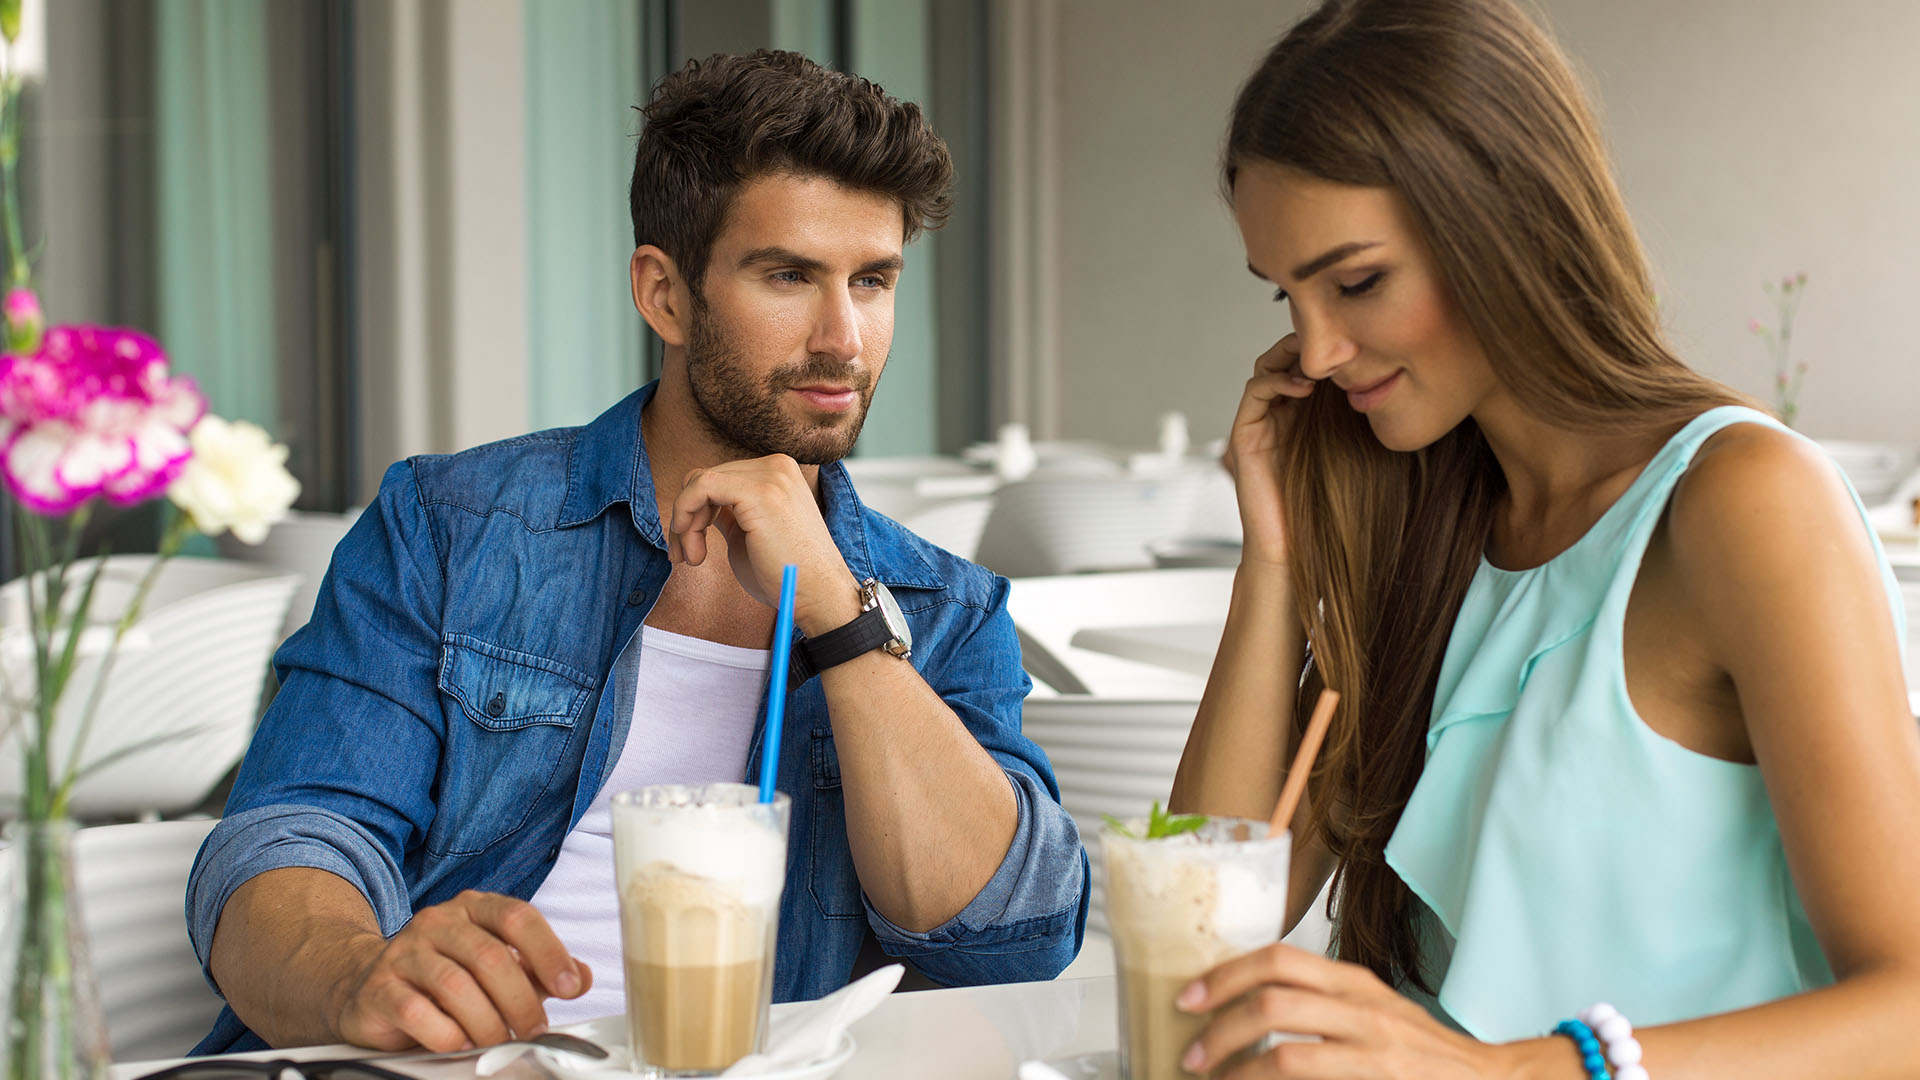 Man in blue-jean shirt sneering at brunette woman sitting next to him and having a coffee. She is smiling while looking down.